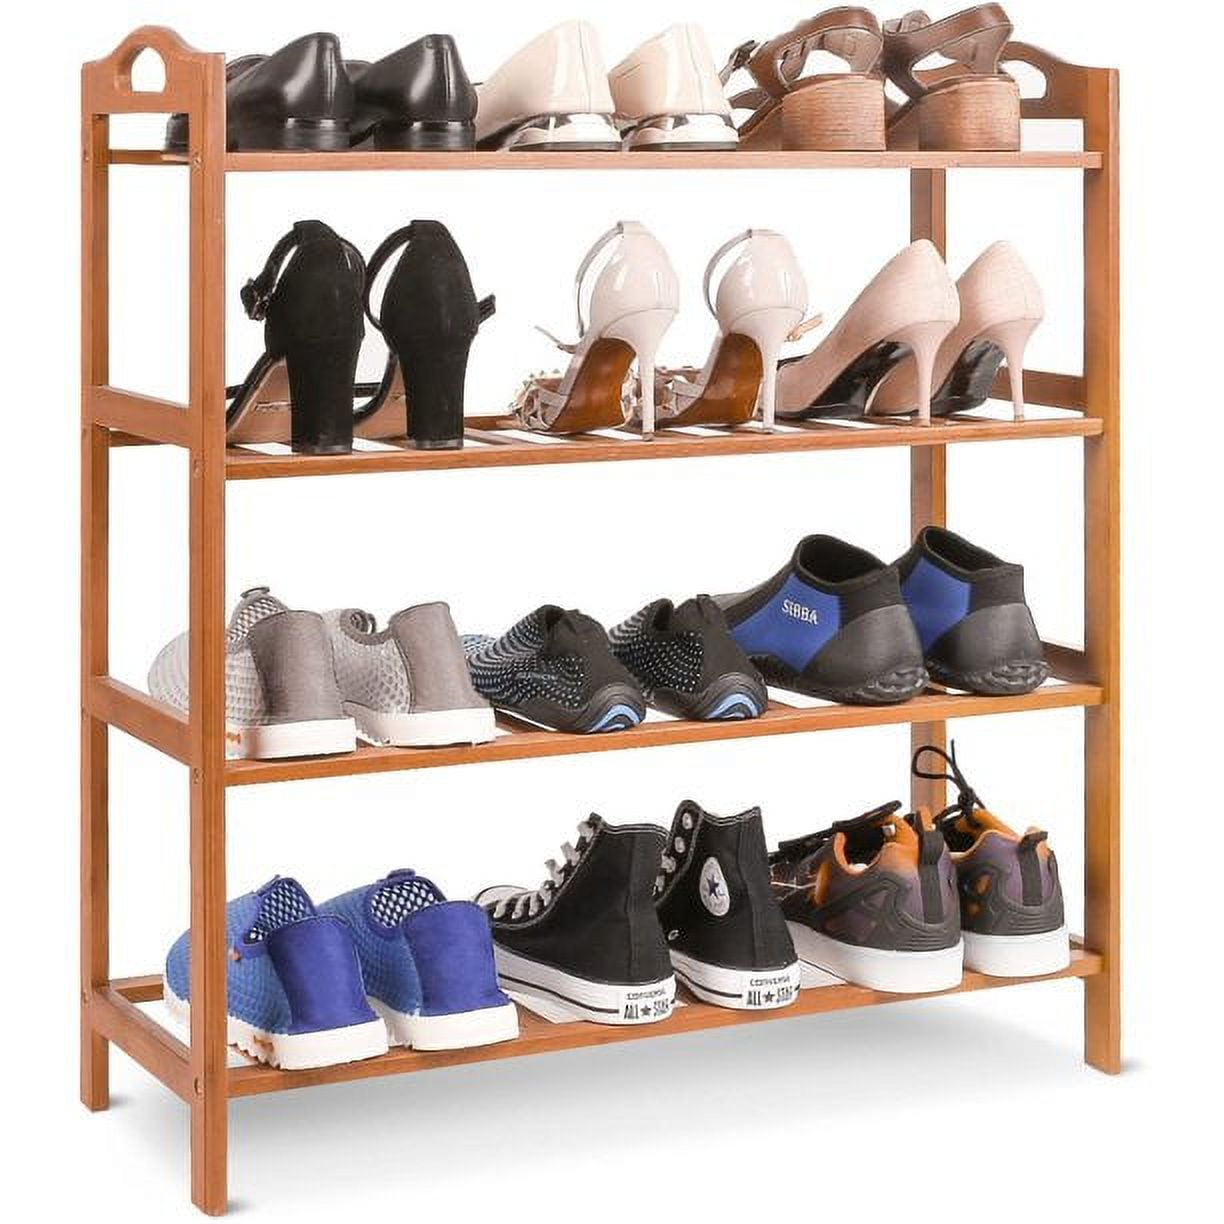 NEW Long-Lasting Shoe Storage Bamboo Shoe Rack Organizer can hold